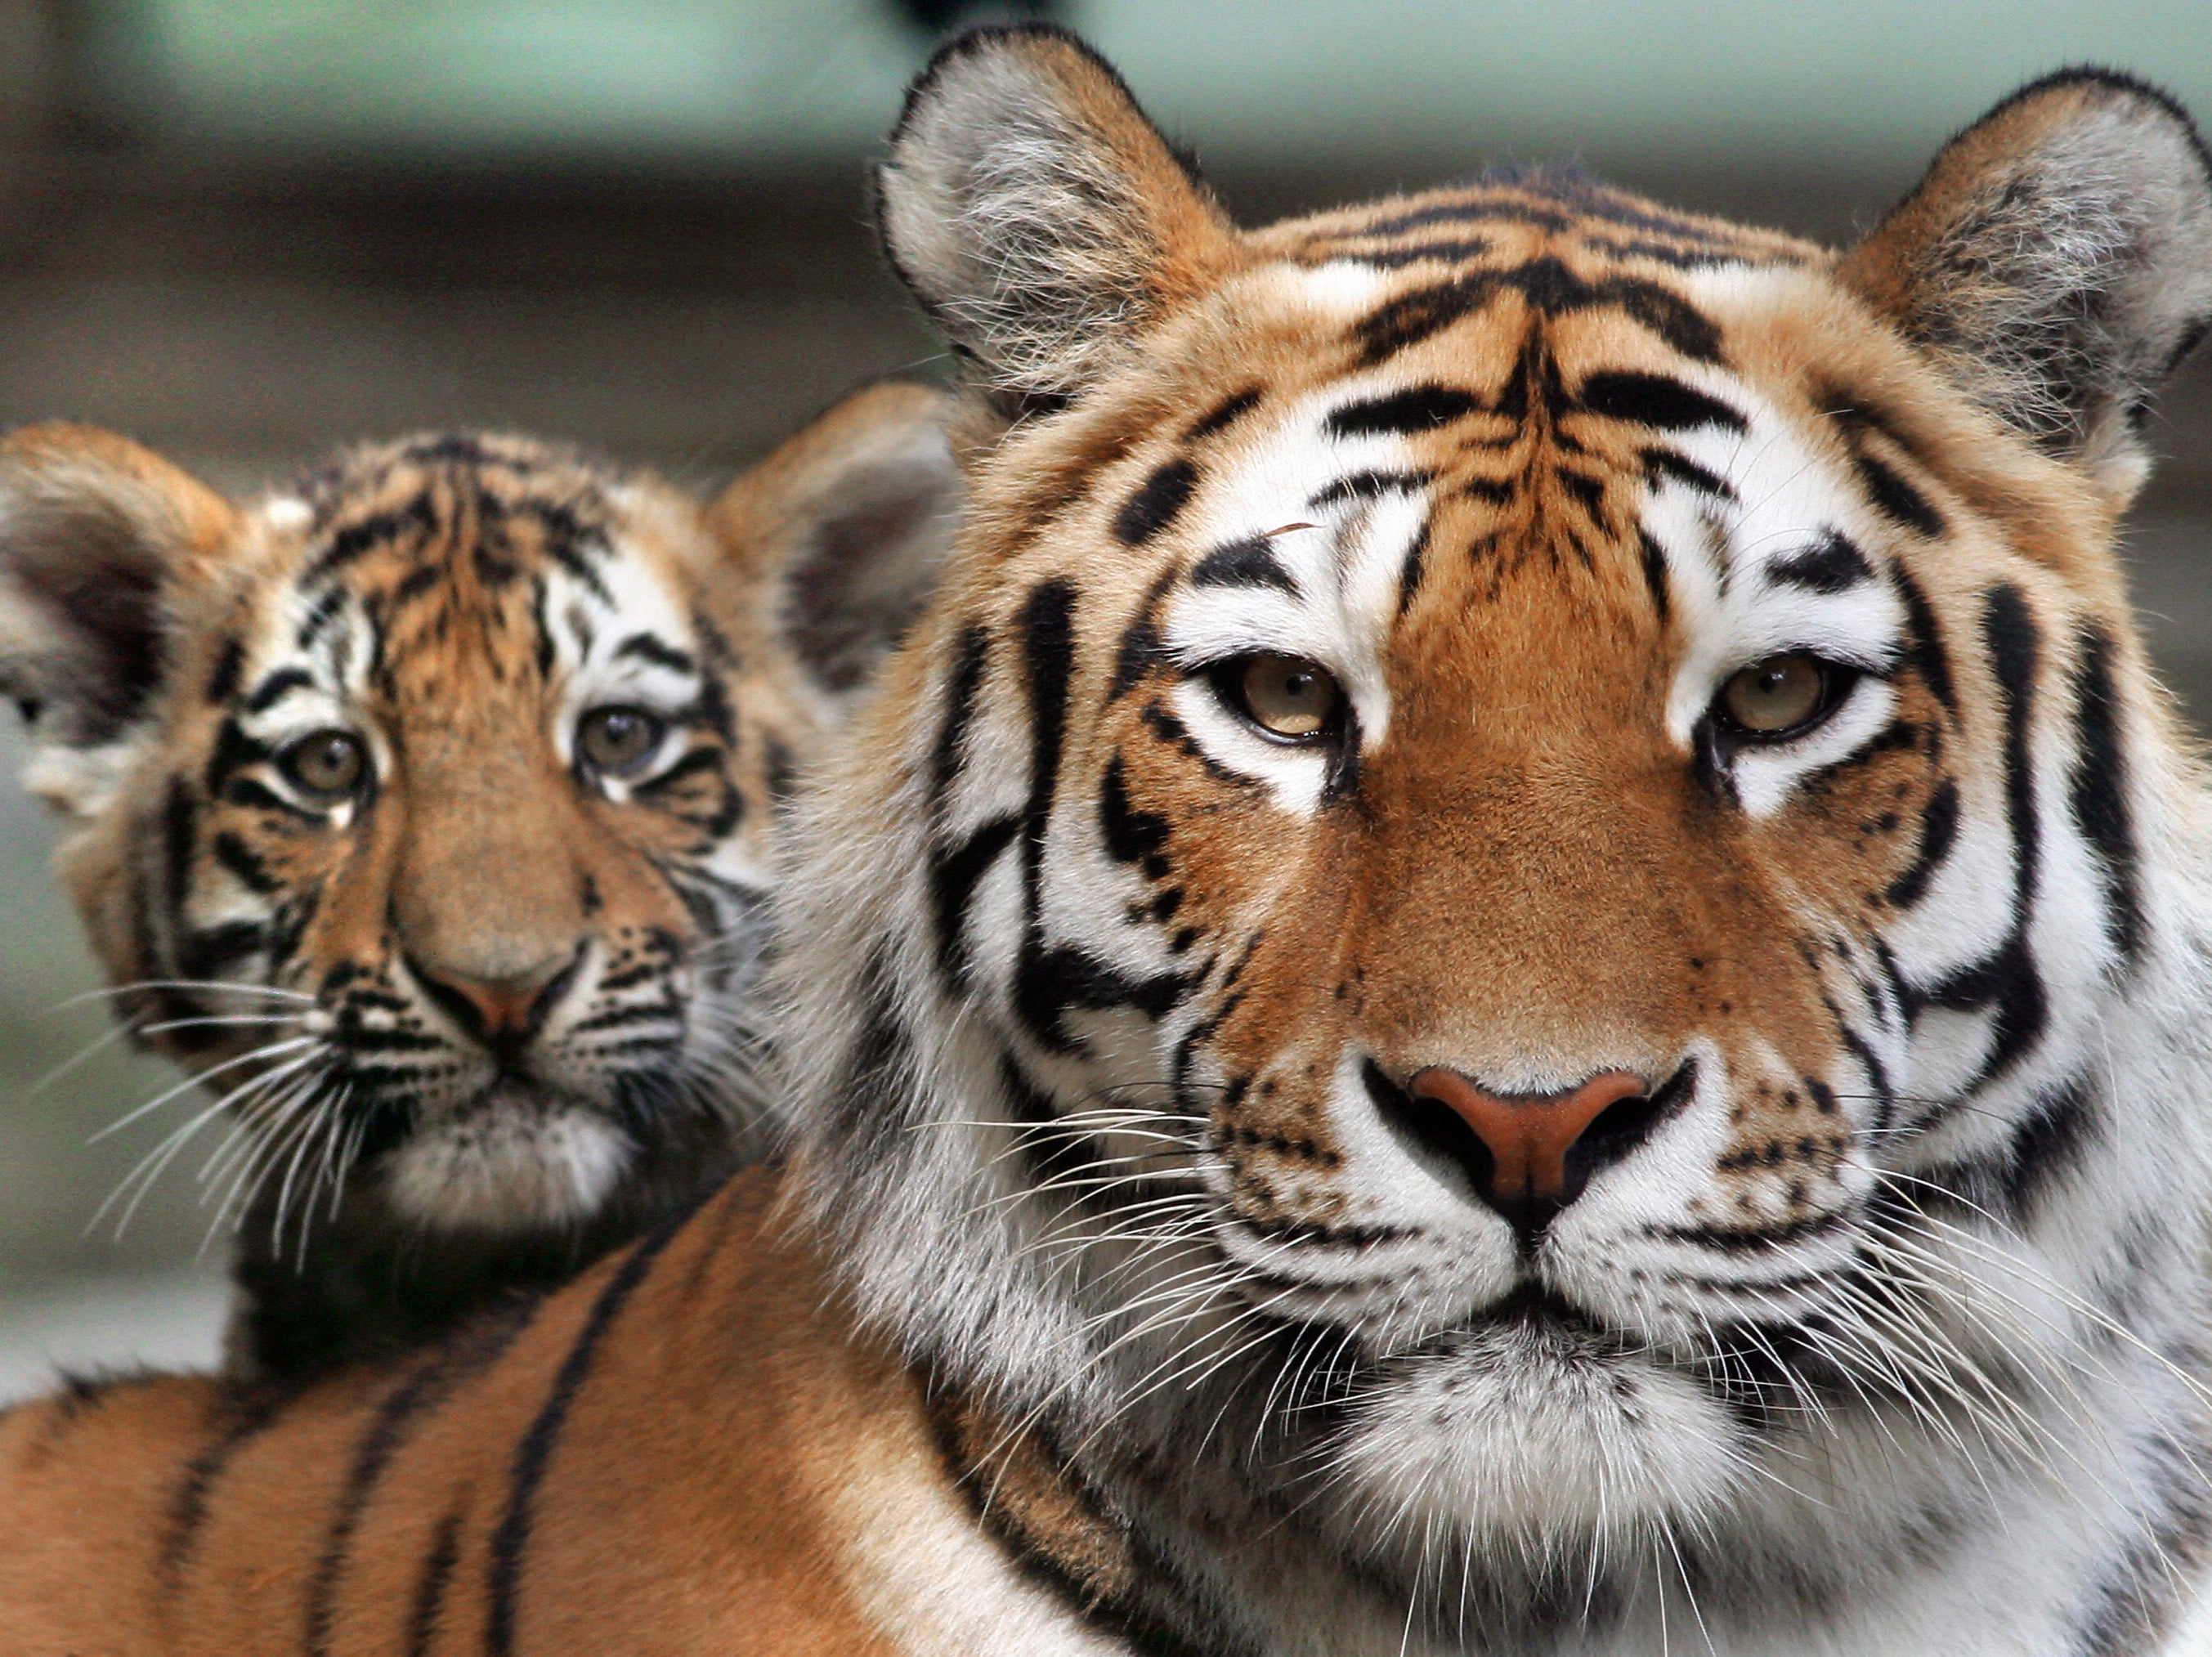 Siberian tigers are the largest species of tiger in the world